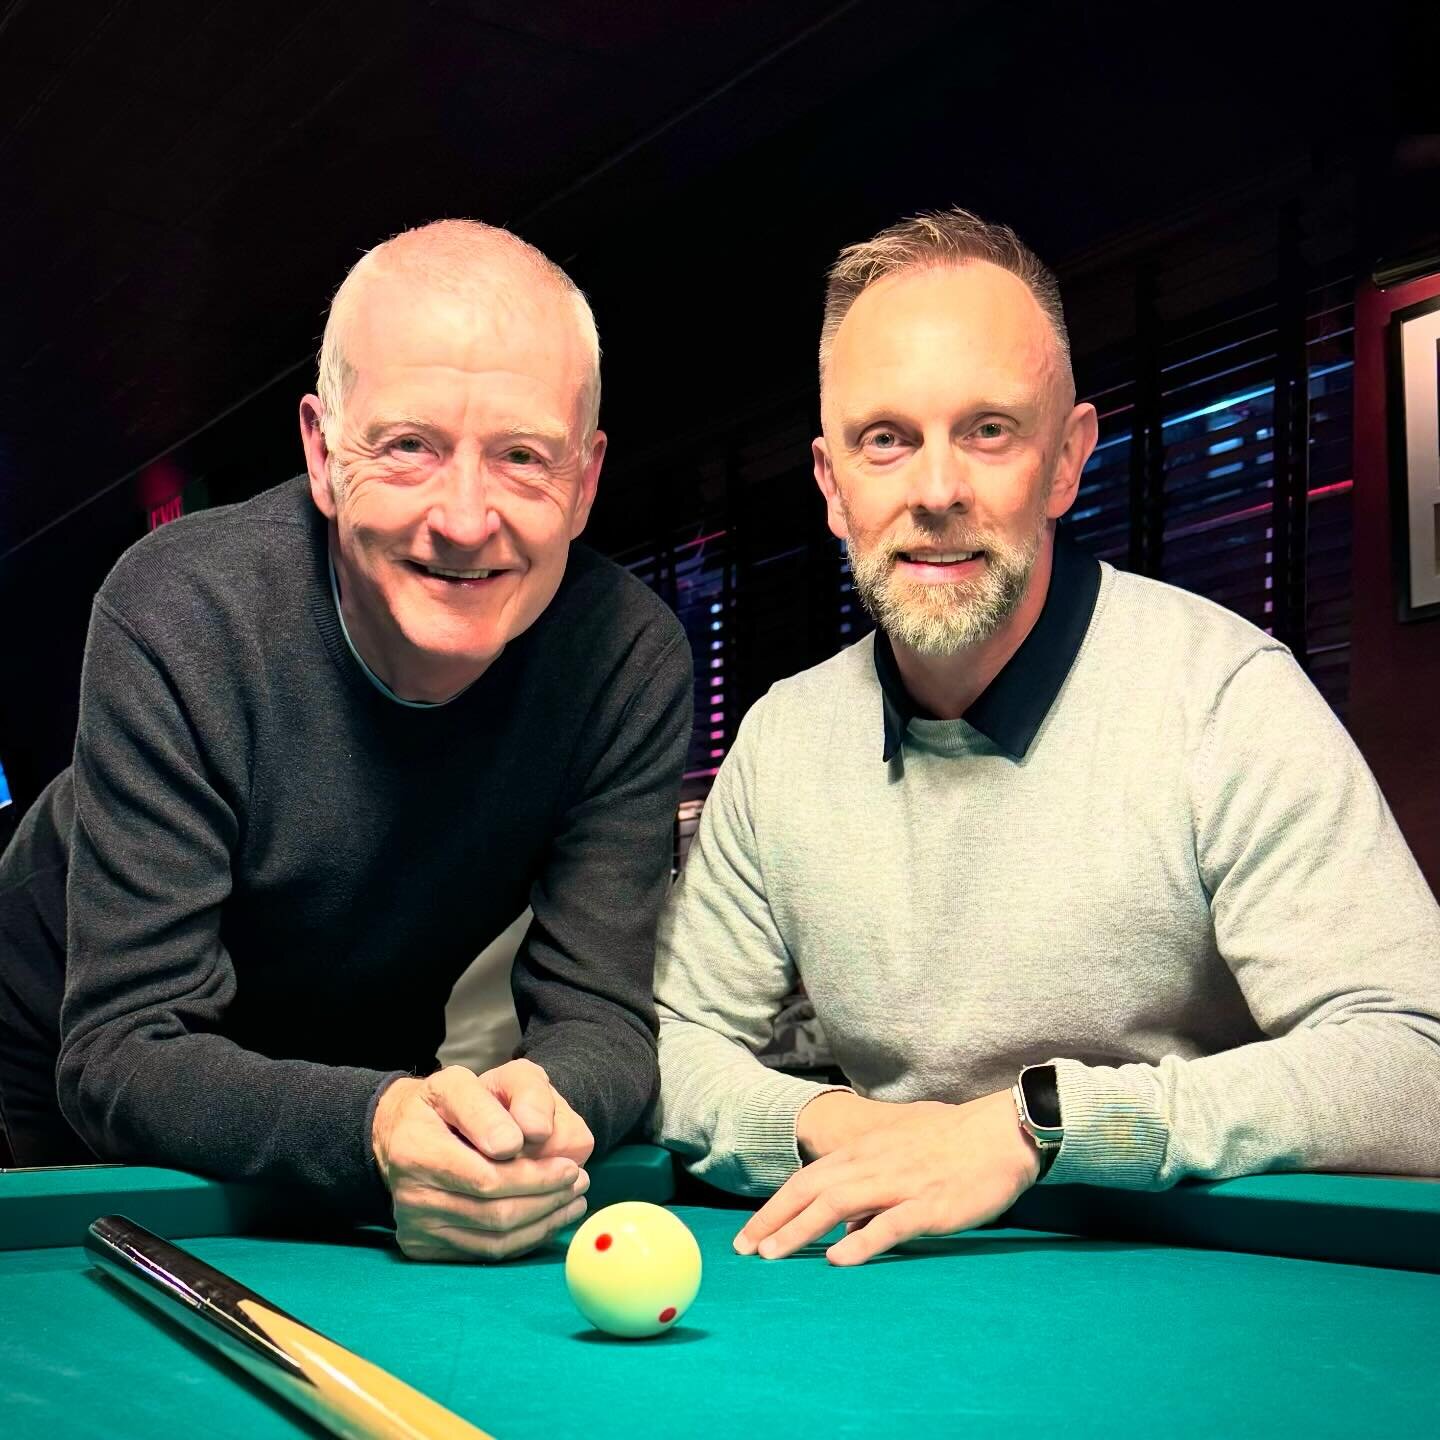 The one and only Steve Davis at Amsterdam Billiards in New York City! 

In 2003 we played on the European Mosconi Cup team together.

Even with Steve using a house cue I wouldn&rsquo;t want to bet against him!

📸 by @williamfuentes 

@molinaricues 
